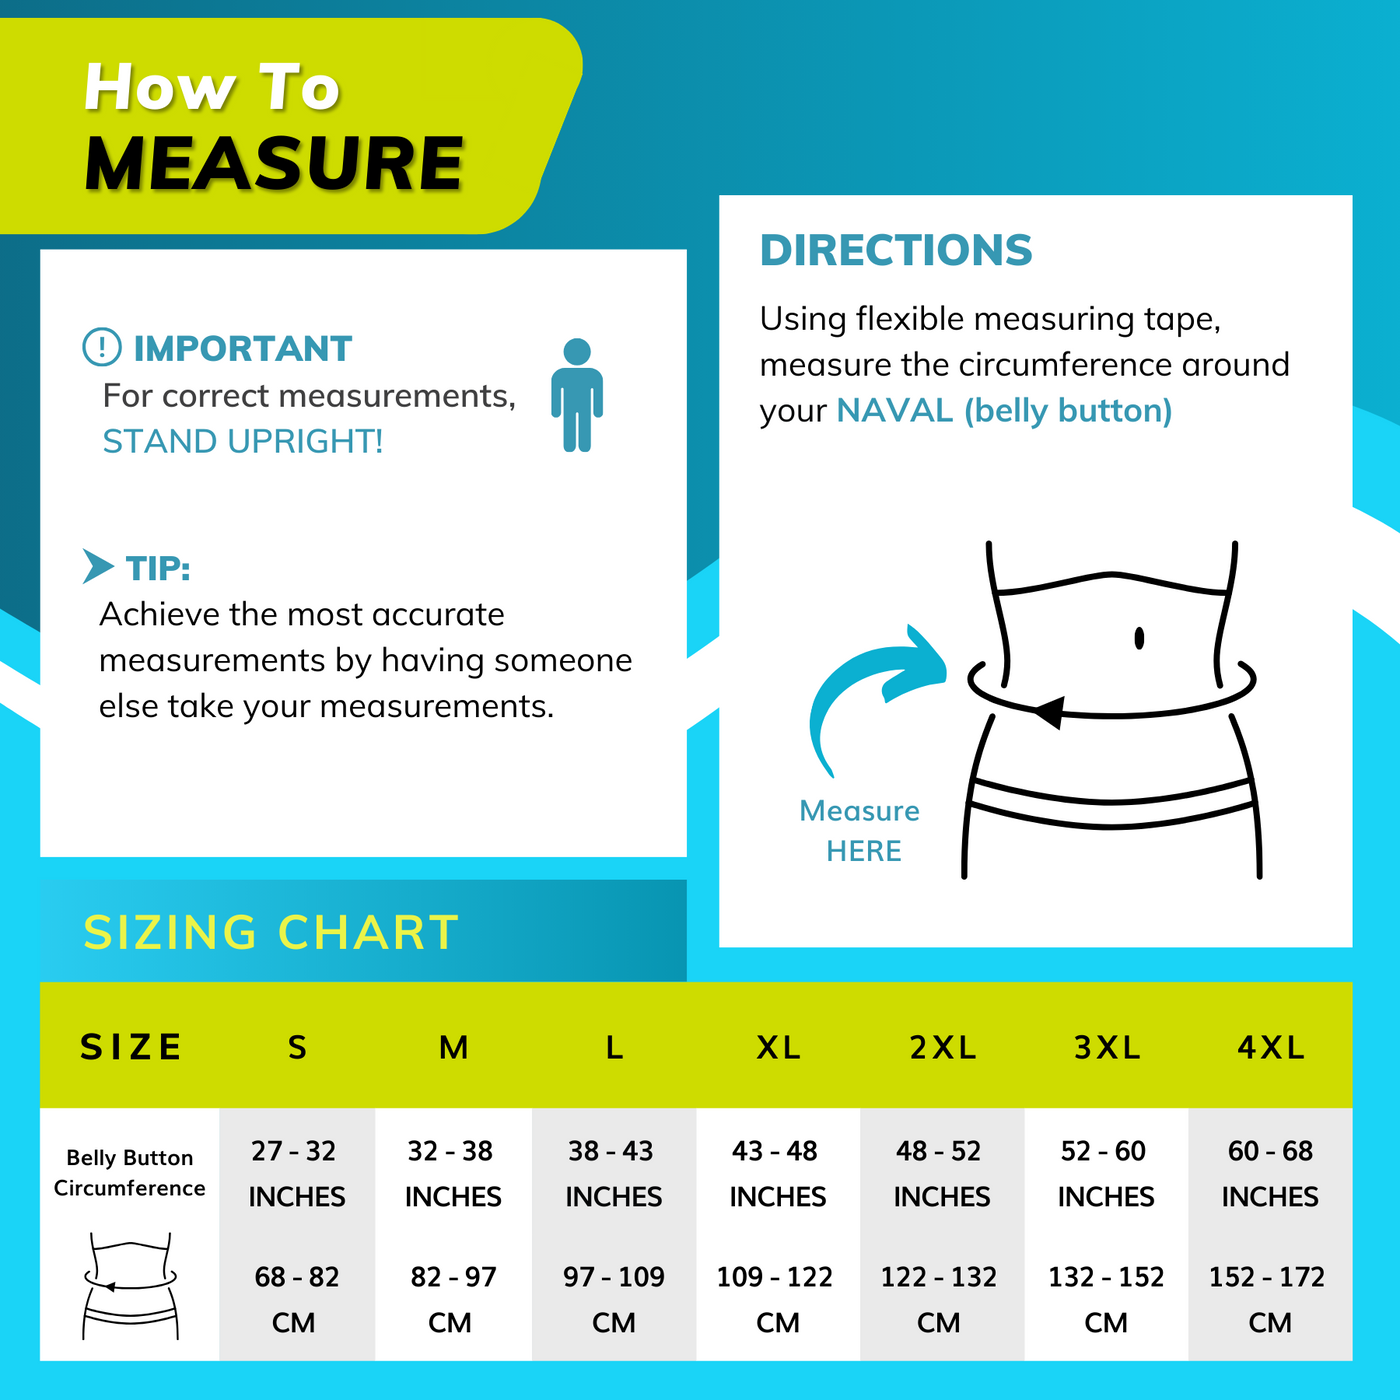 Sizing chart for herniated disc back brace - measure the circumference around your belly button. S-4XL fits 27" - 68" circumferences